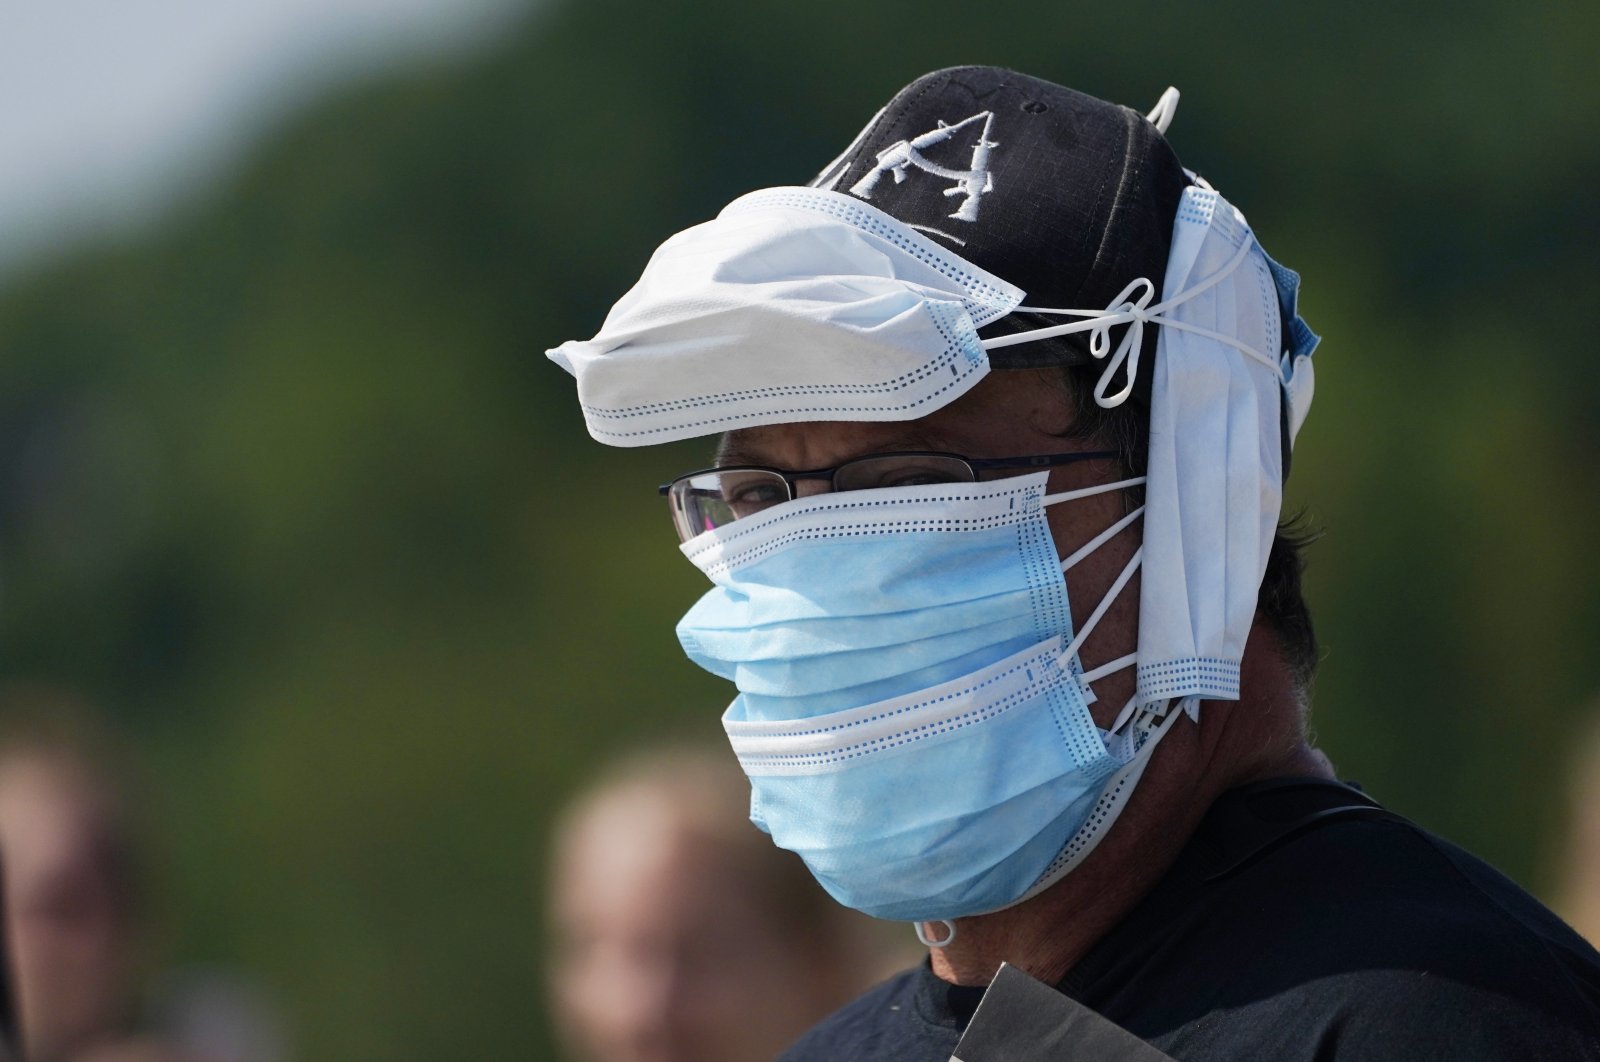 A person wears multiple face coverings during the pandemic-delayed State of Maine Bicentennial Parade, in Lewiston, Maine, U.S., Aug. 21, 2021. (AP Photo)